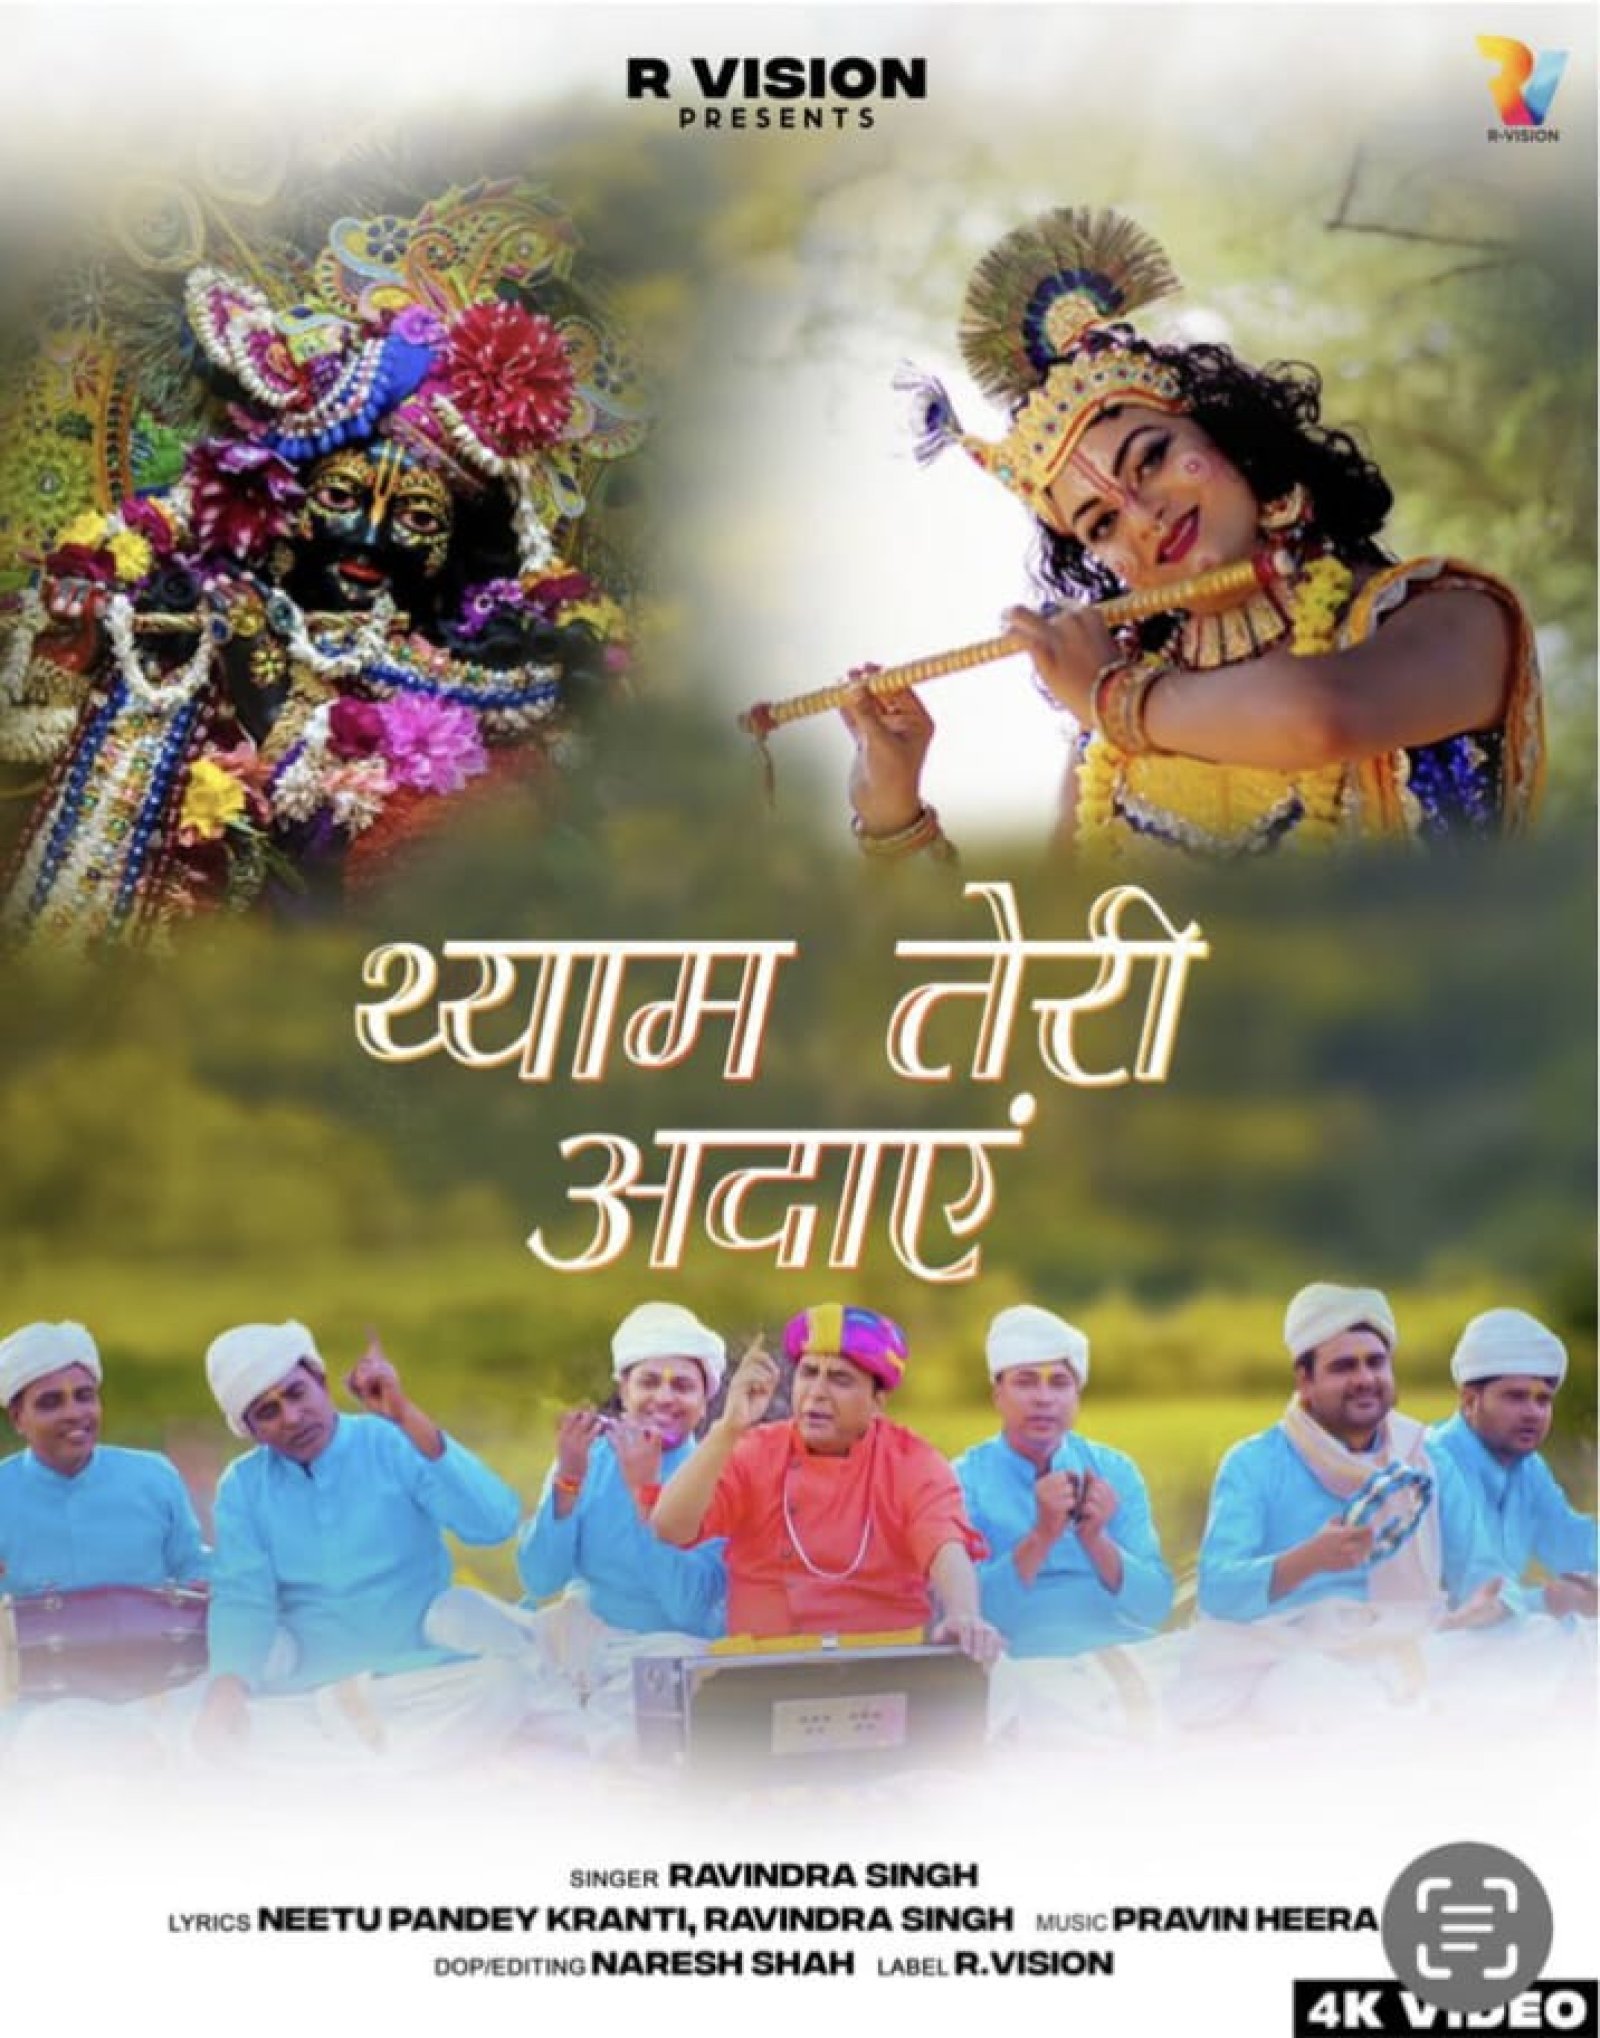 Singer Ravindra Singh's new devotional song 'Shyam Teri Adayen' became popular as soon as it was released